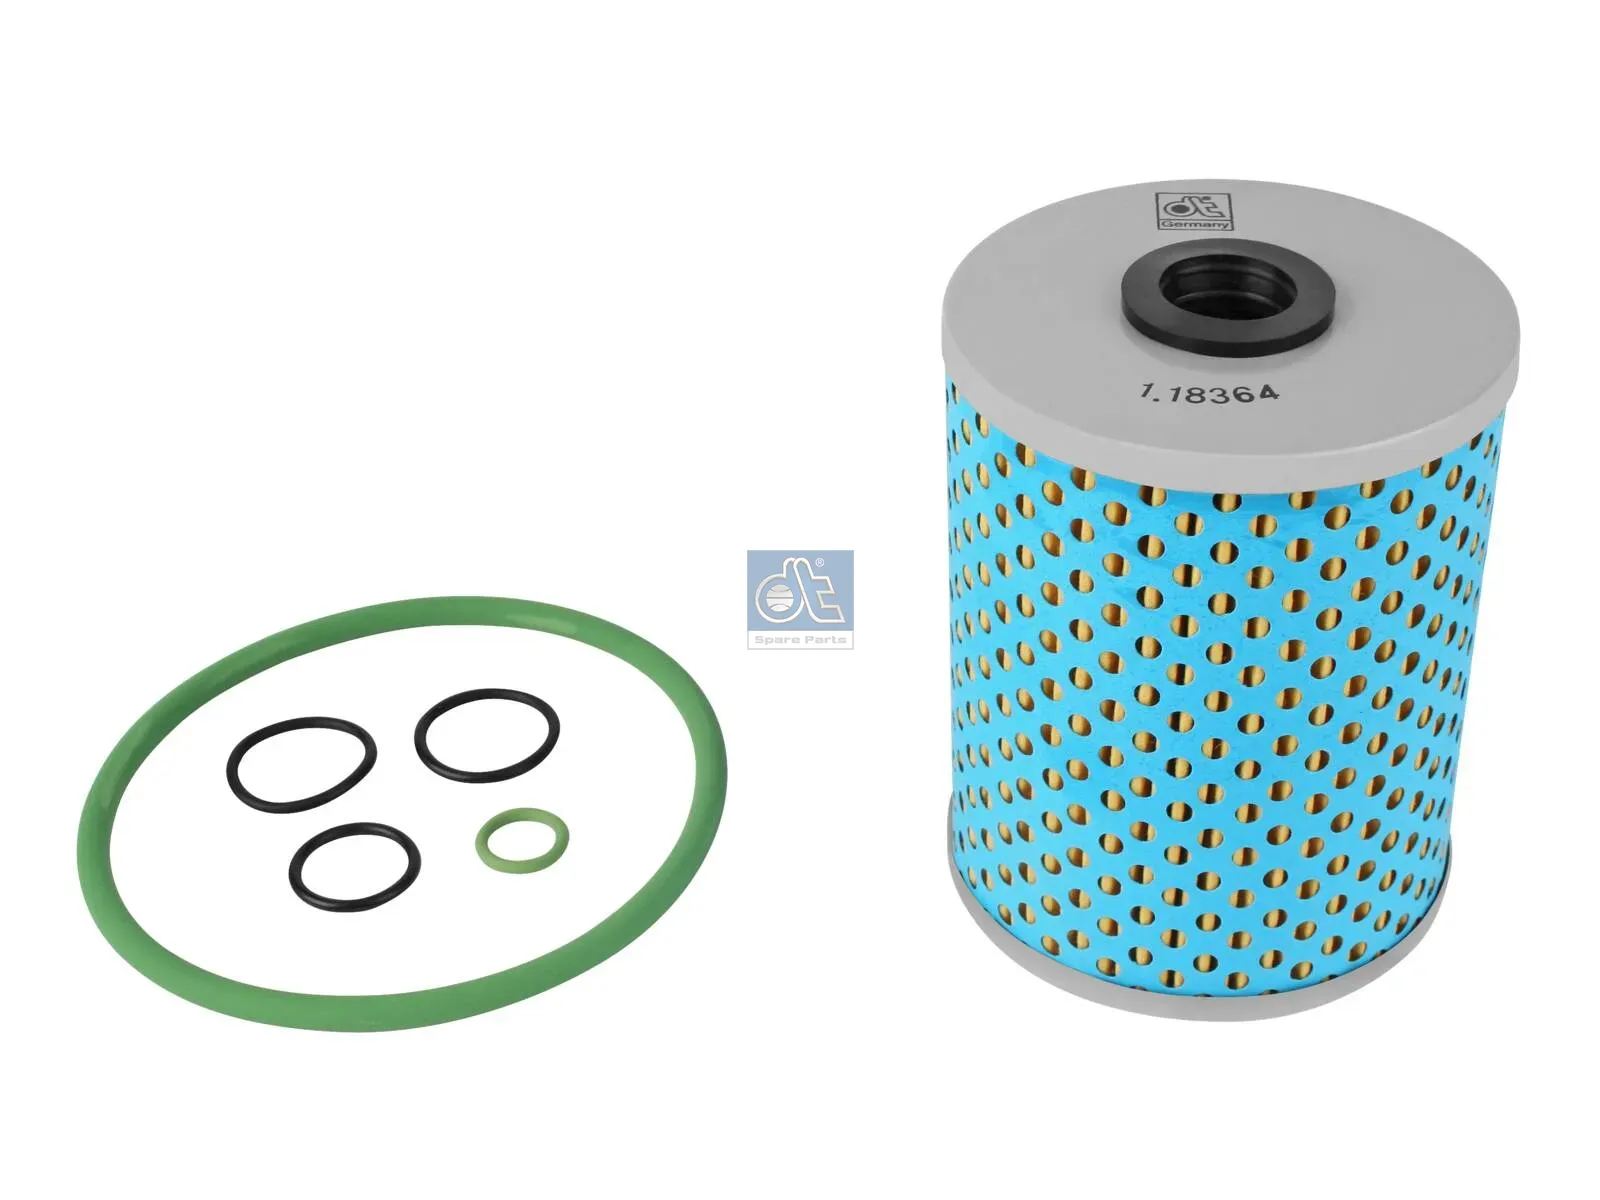 Oil filter, retarder, with seal rings